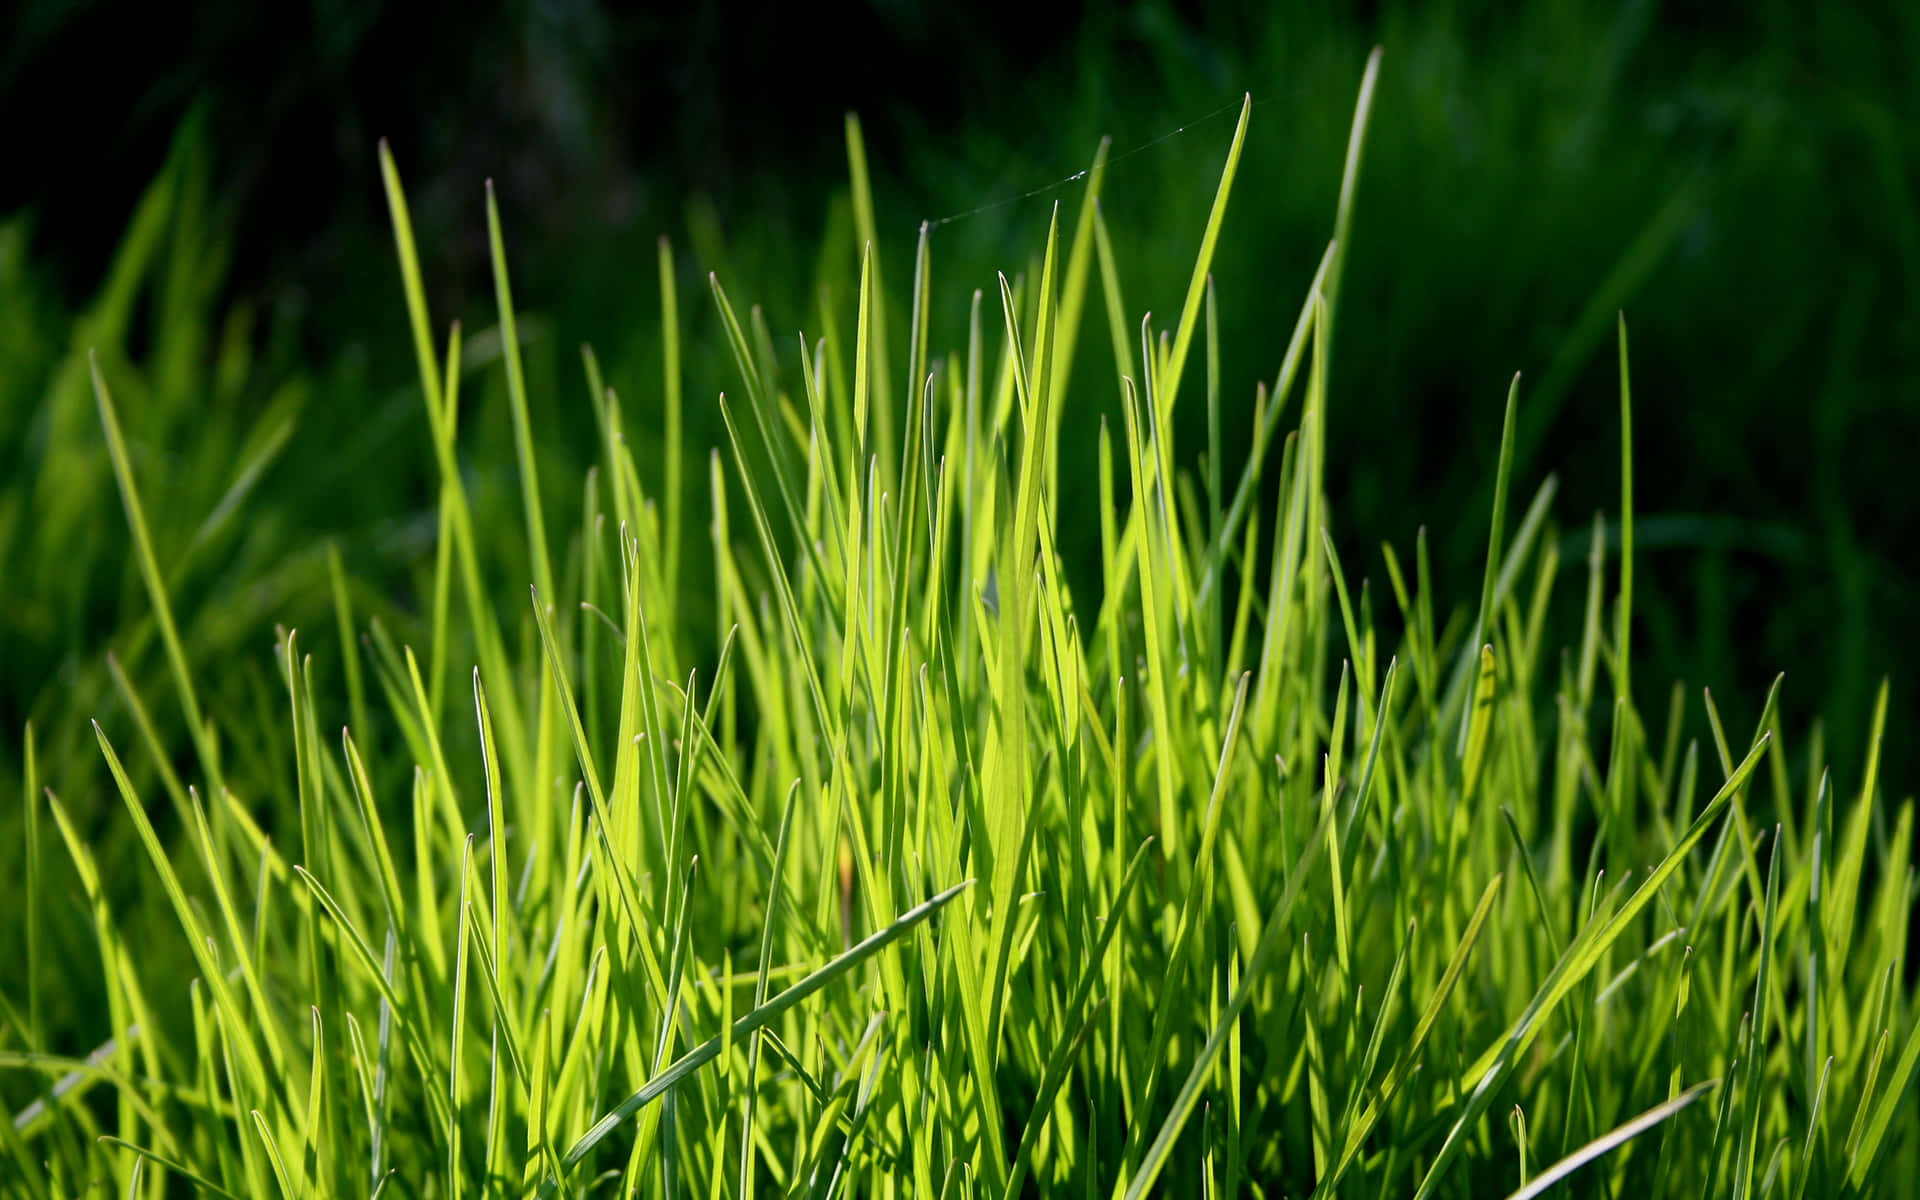 : A picture of lush green grass in the summertime